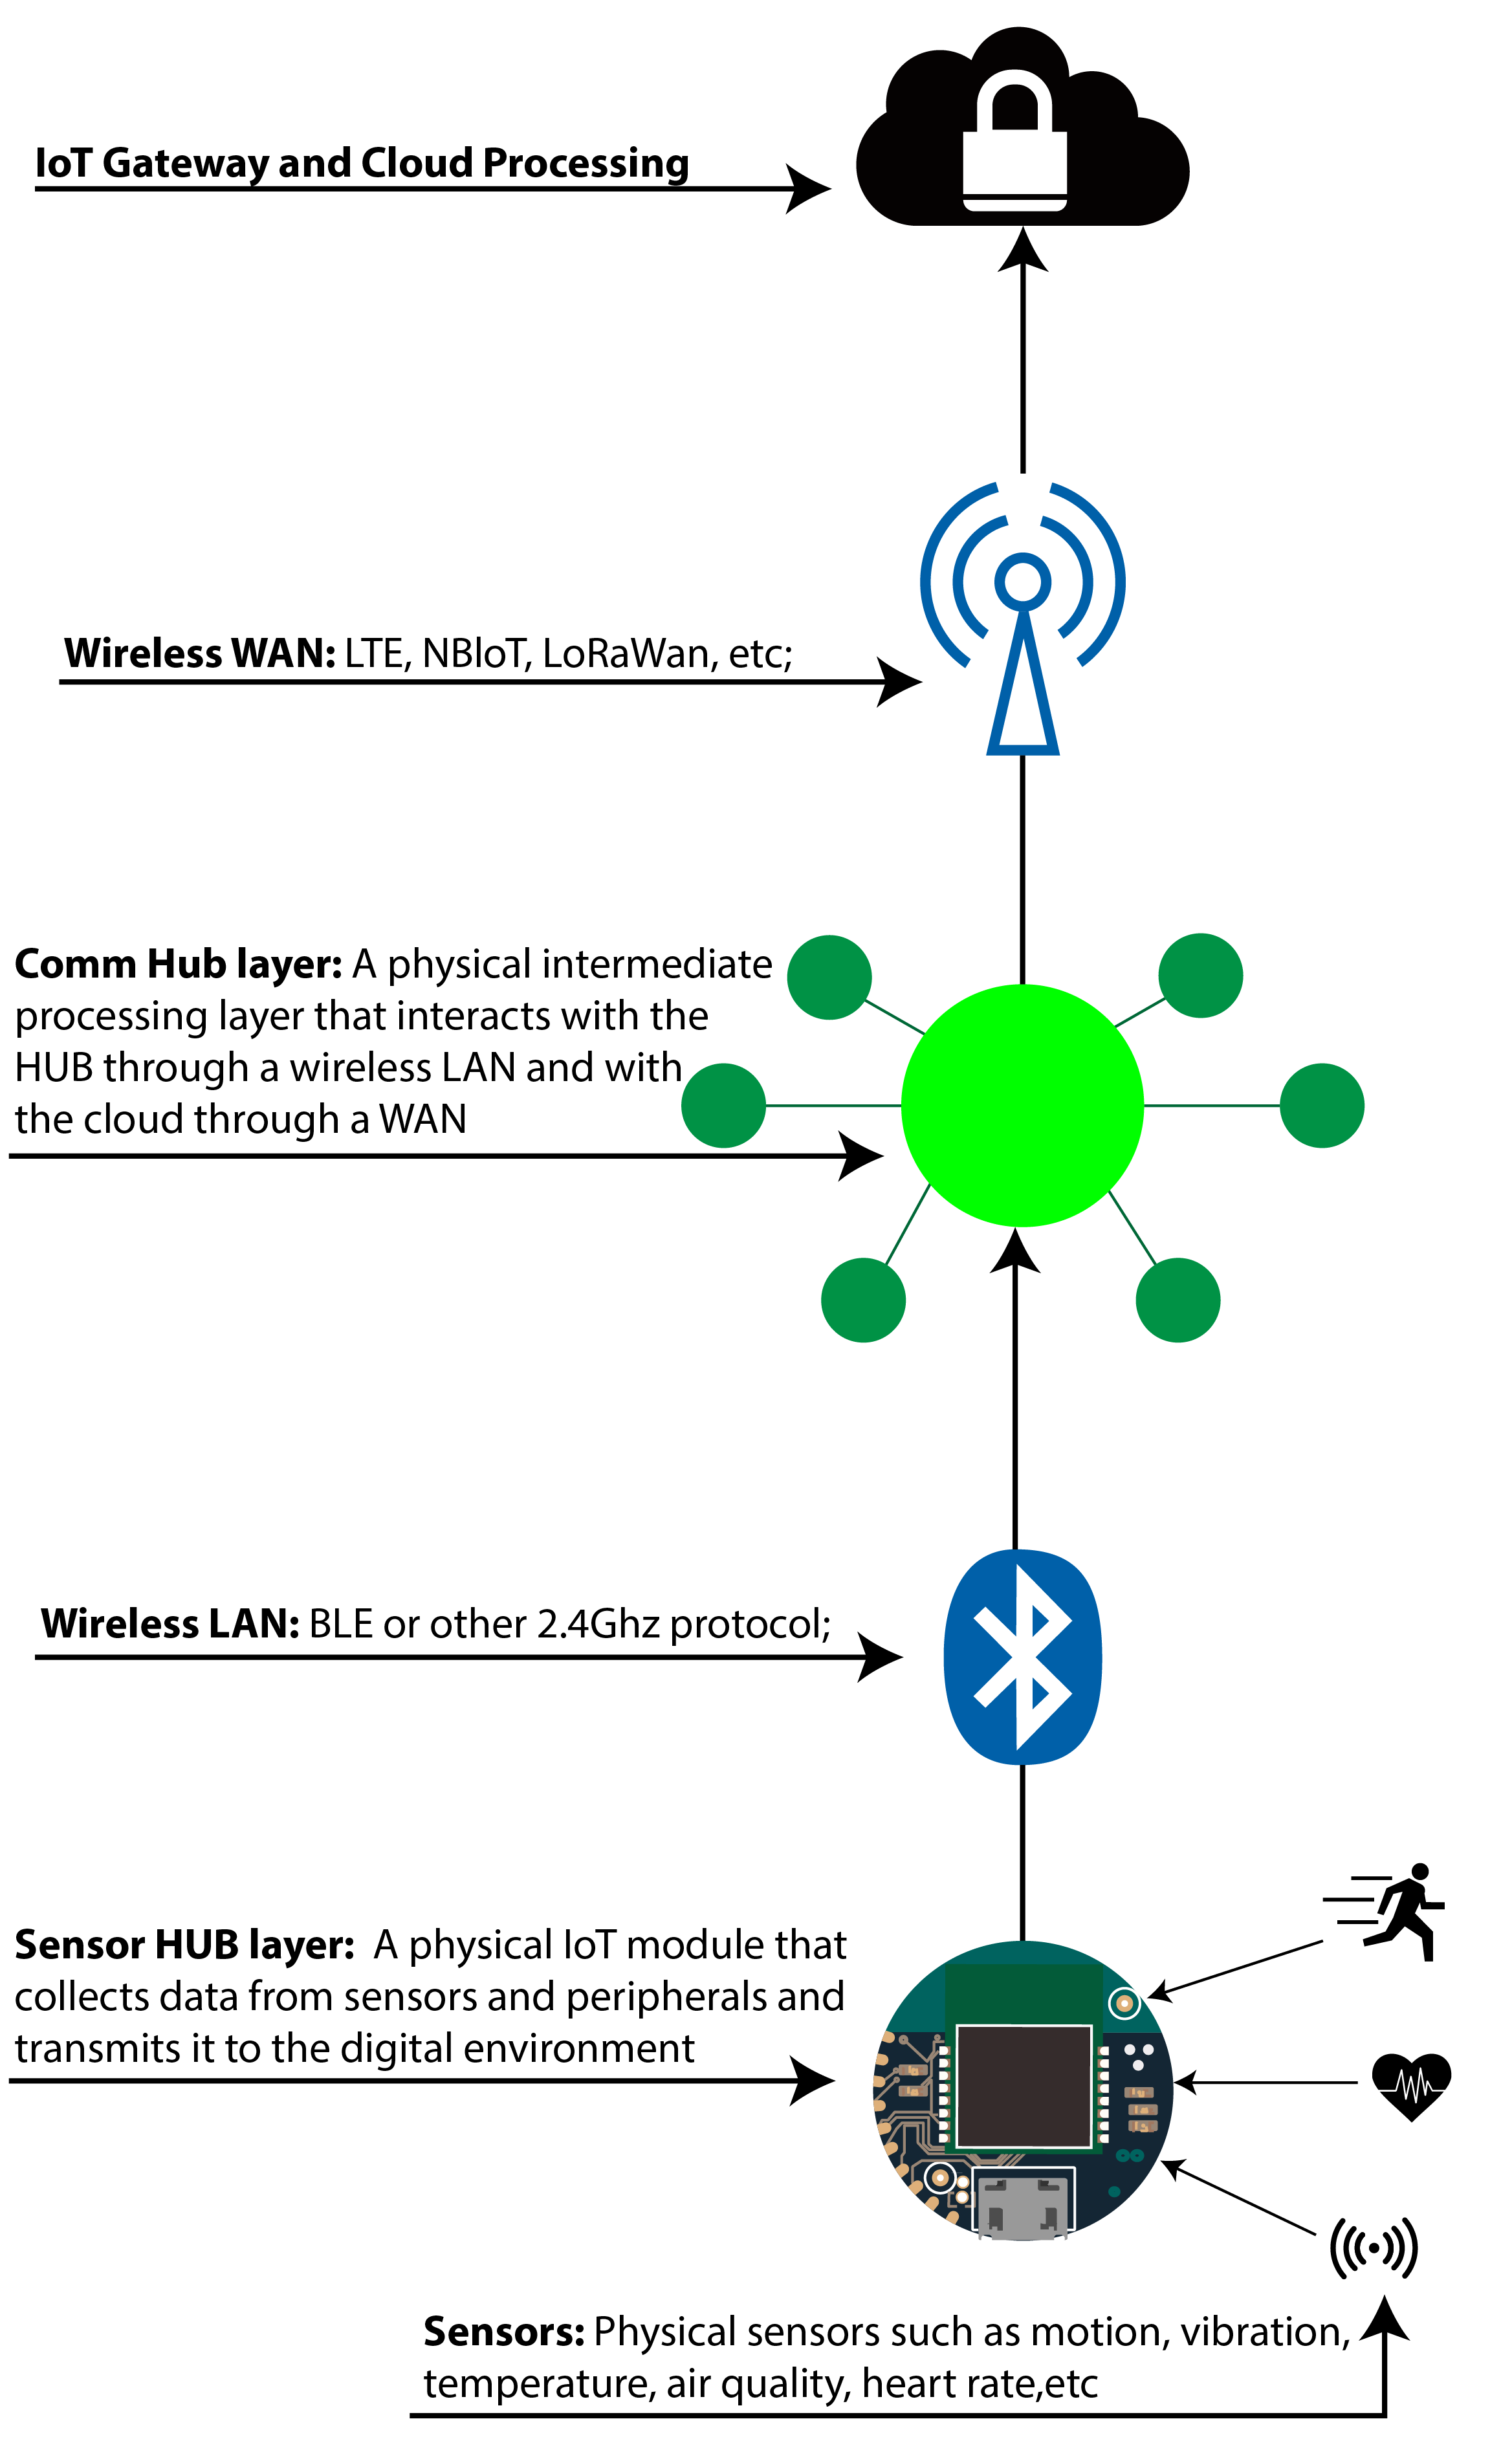 Wireless communication with IoT